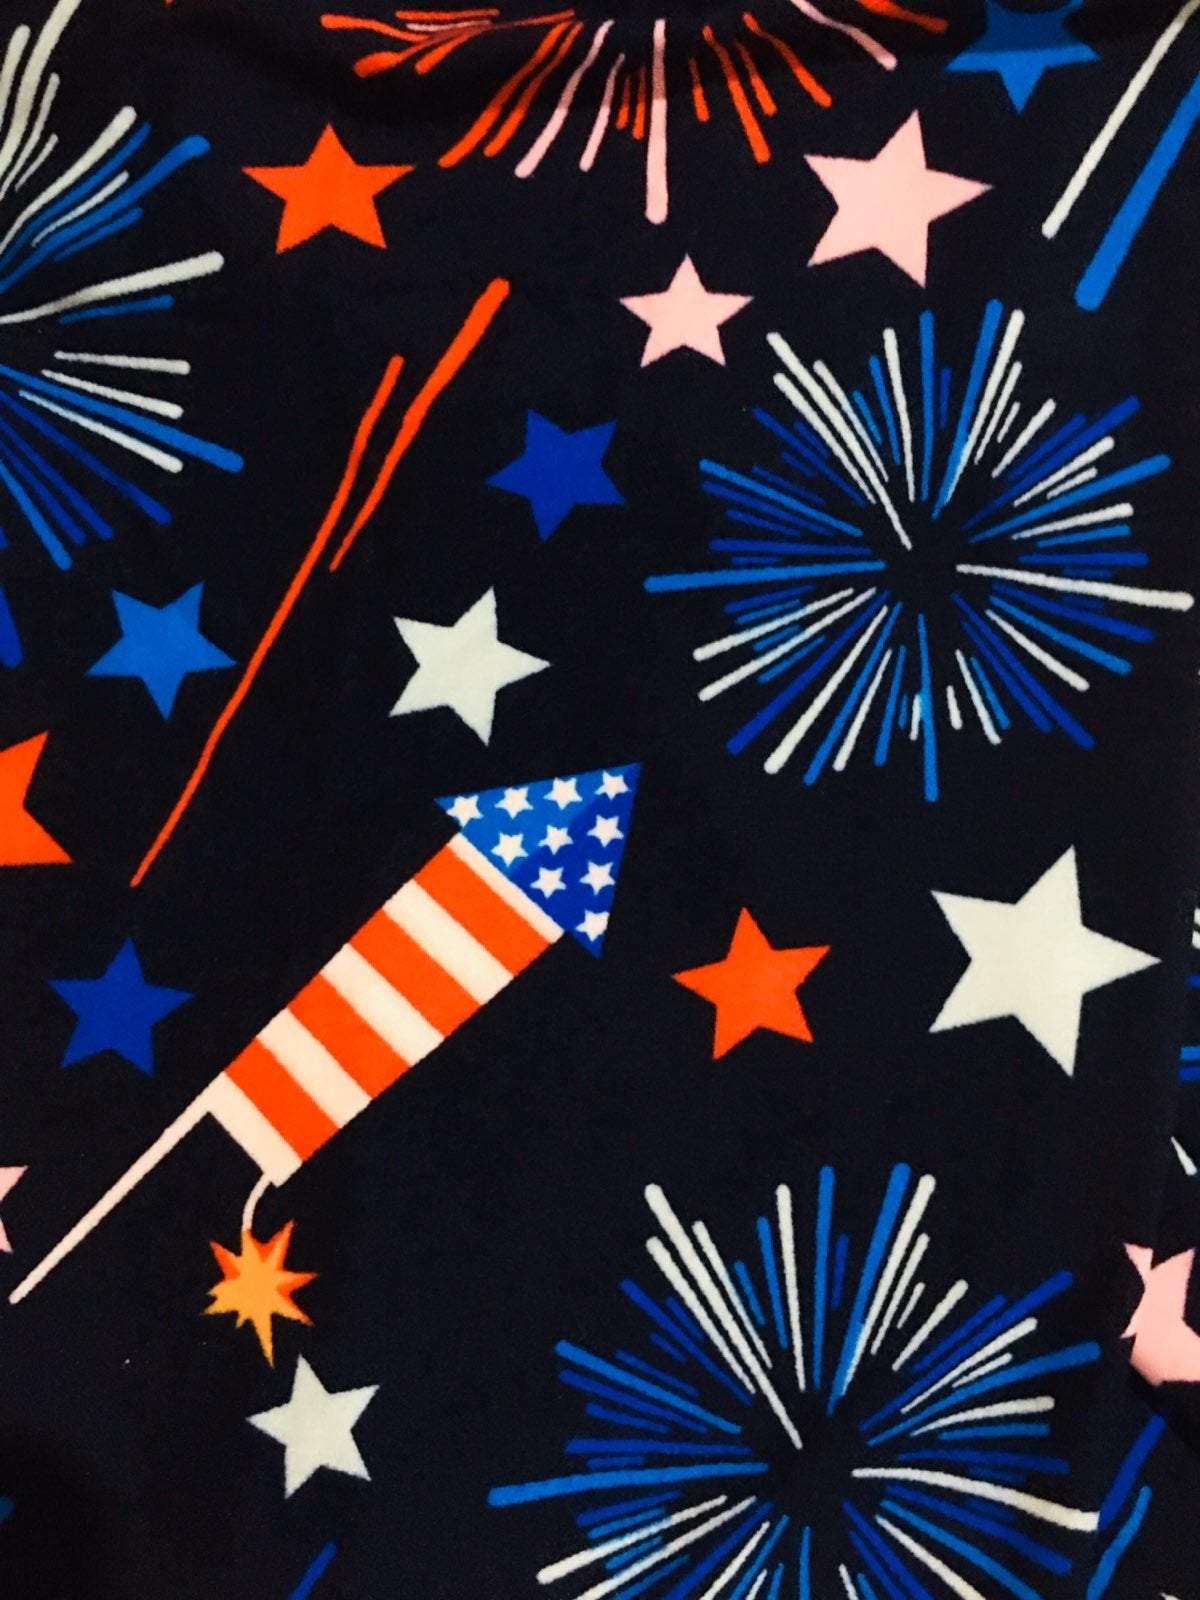 The flag shirt you're buying for July 4th is technically illegal